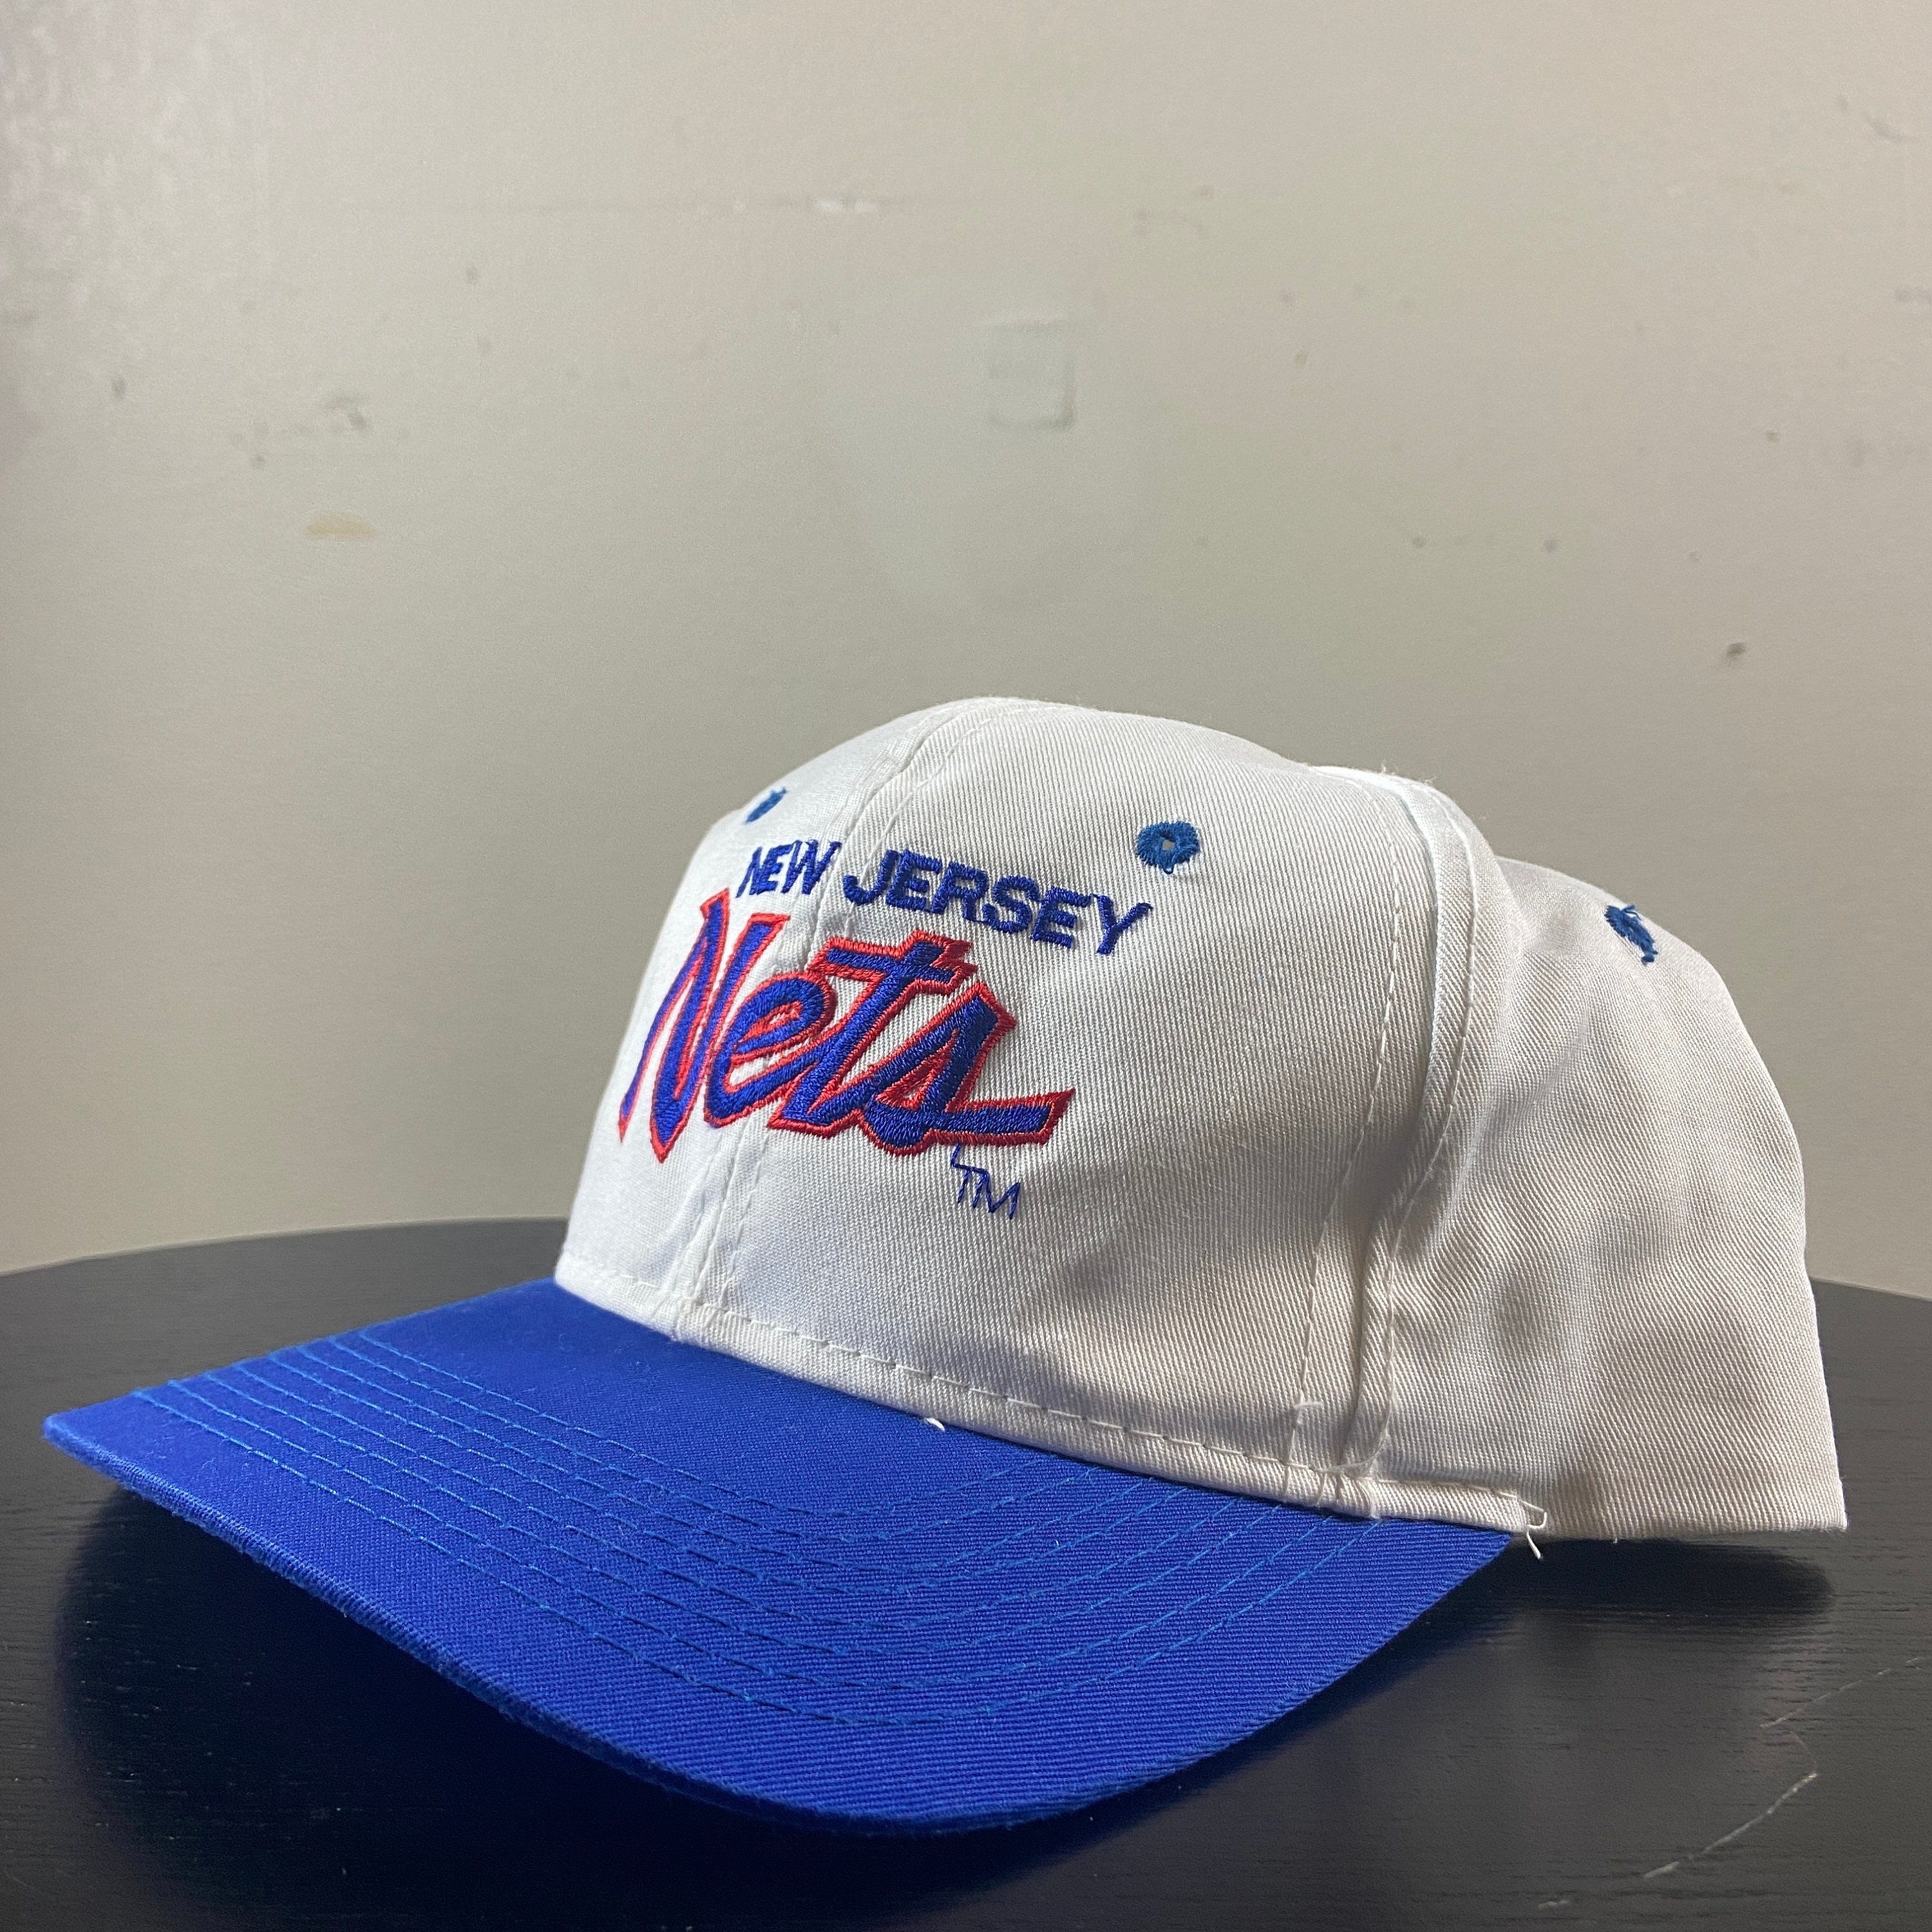 Size 7 1/4 NWT Vintage NBA New Jersey Nets Fitted Cap Hat Red Blue Hardwood  VTG